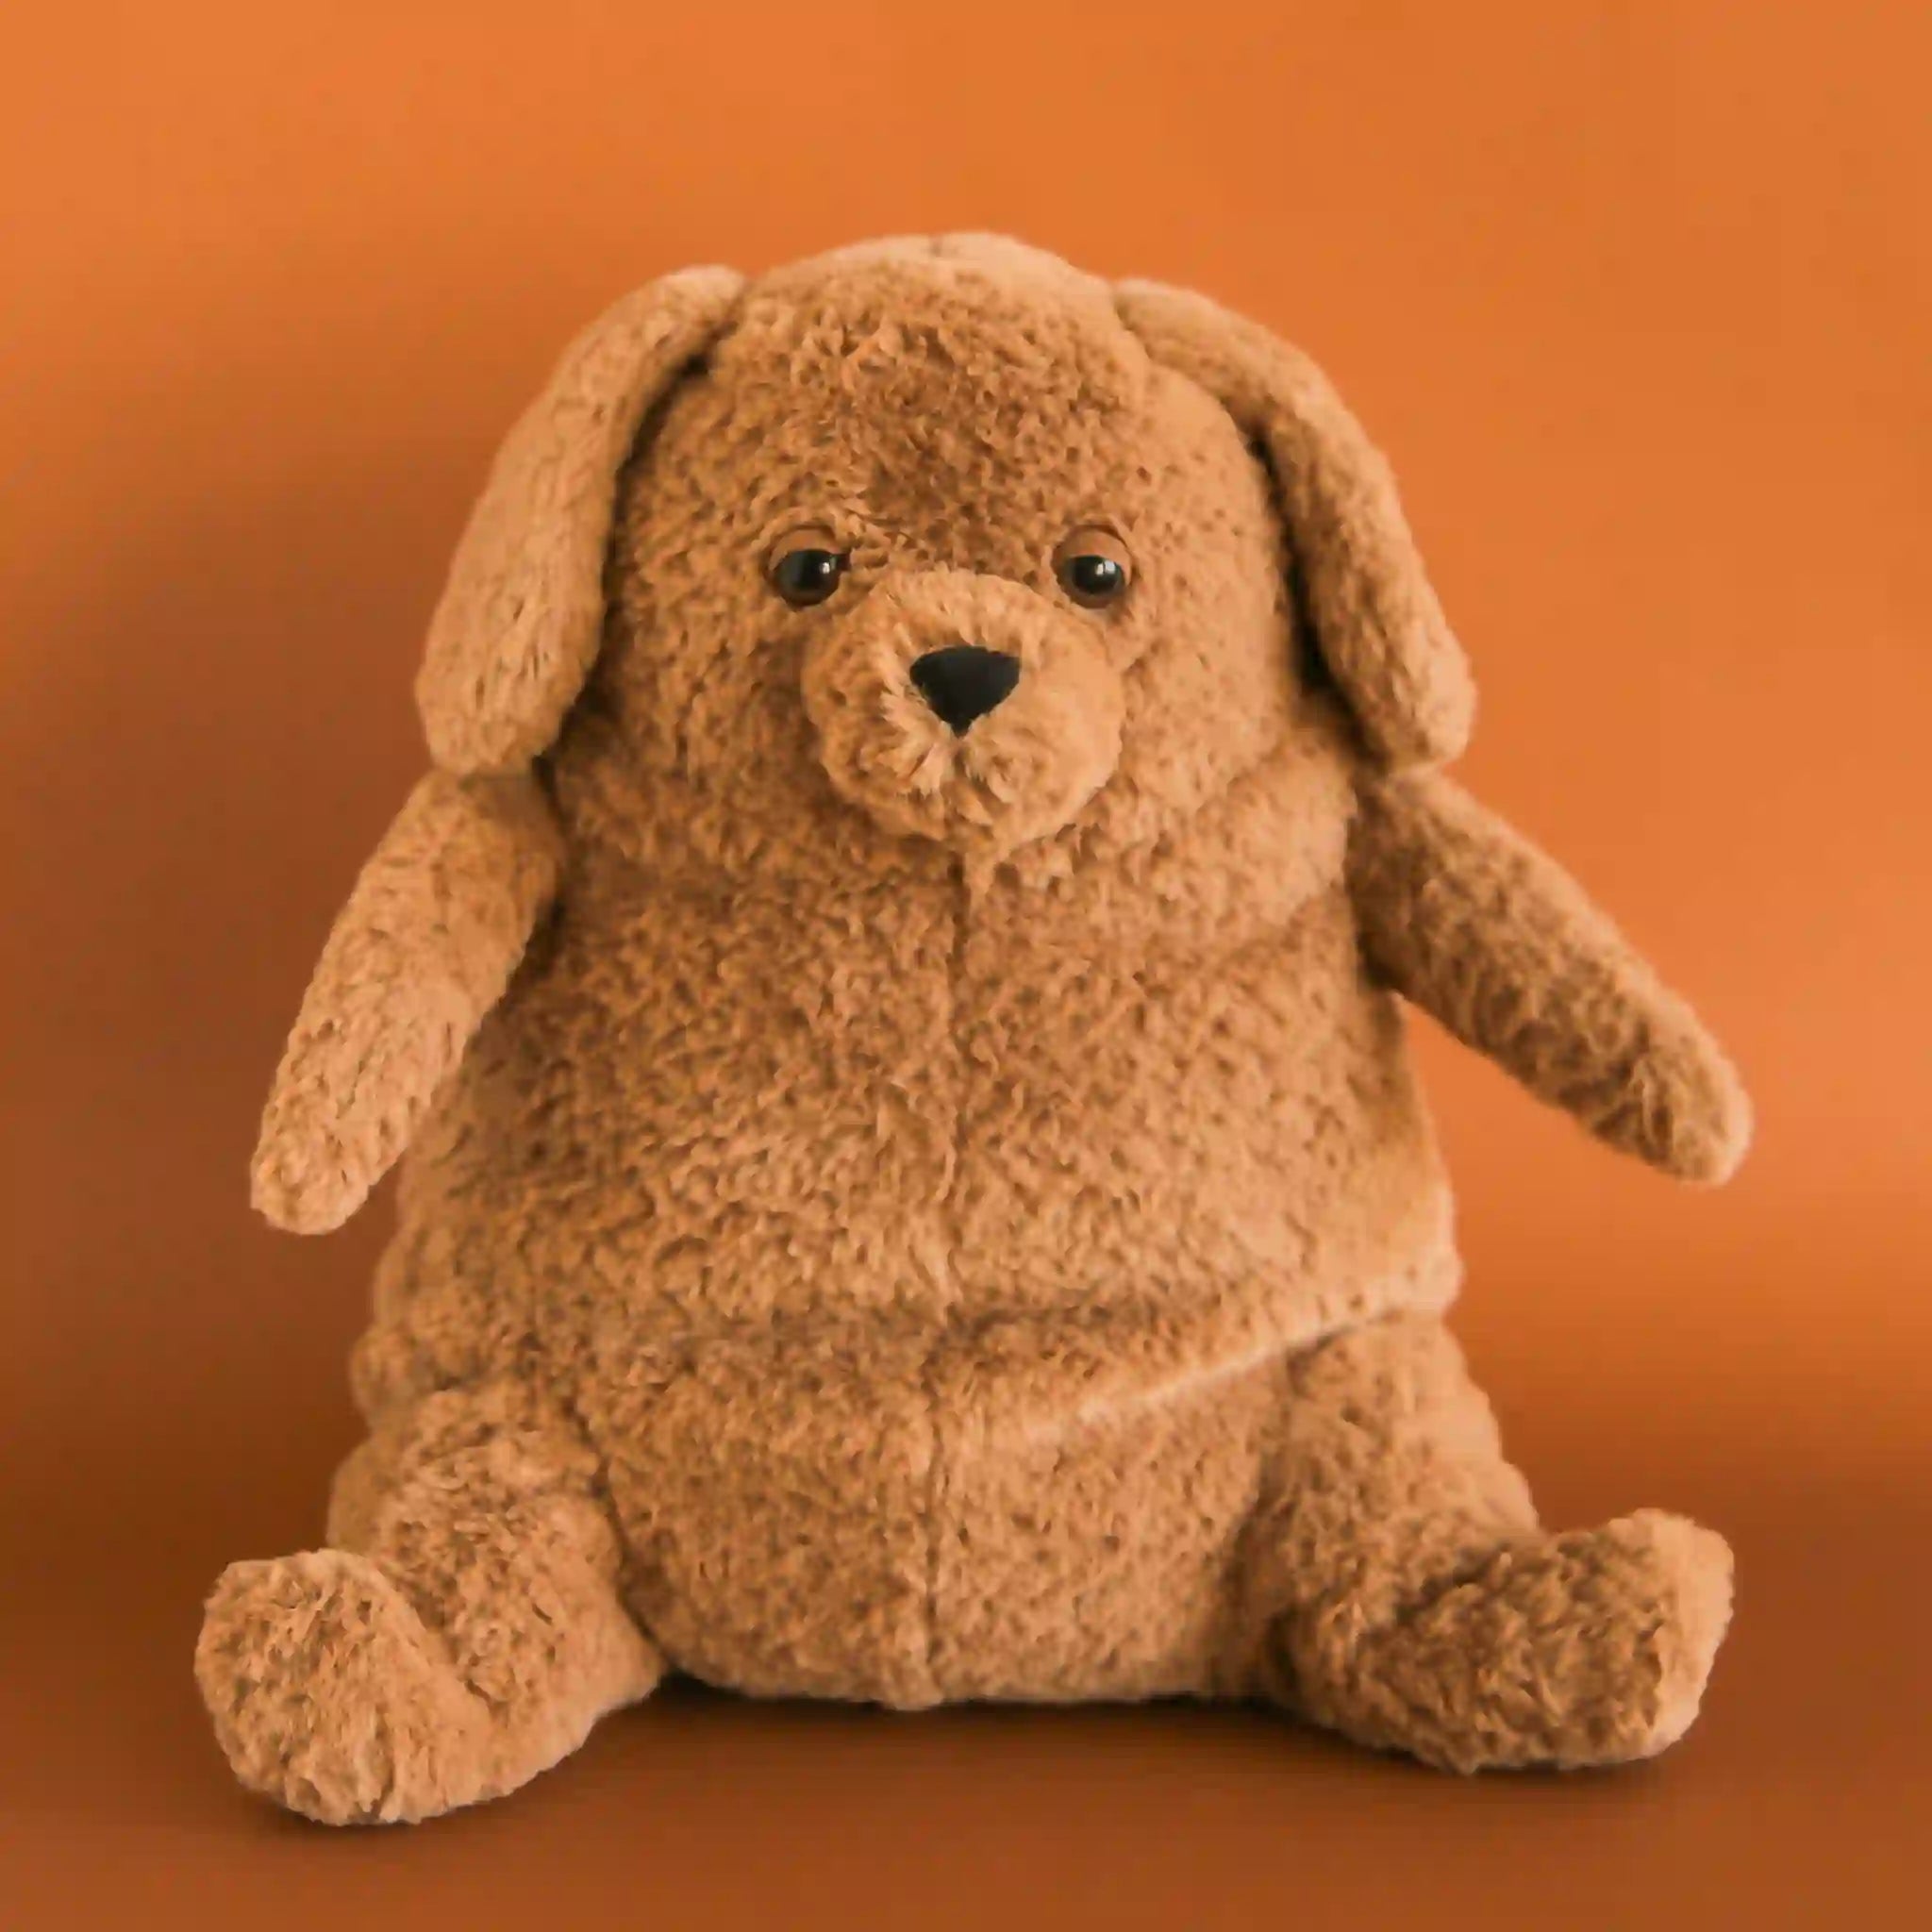 On an orange background is a snuggly brown stuffed animal dog with sleepy eyes and a chunky figure.